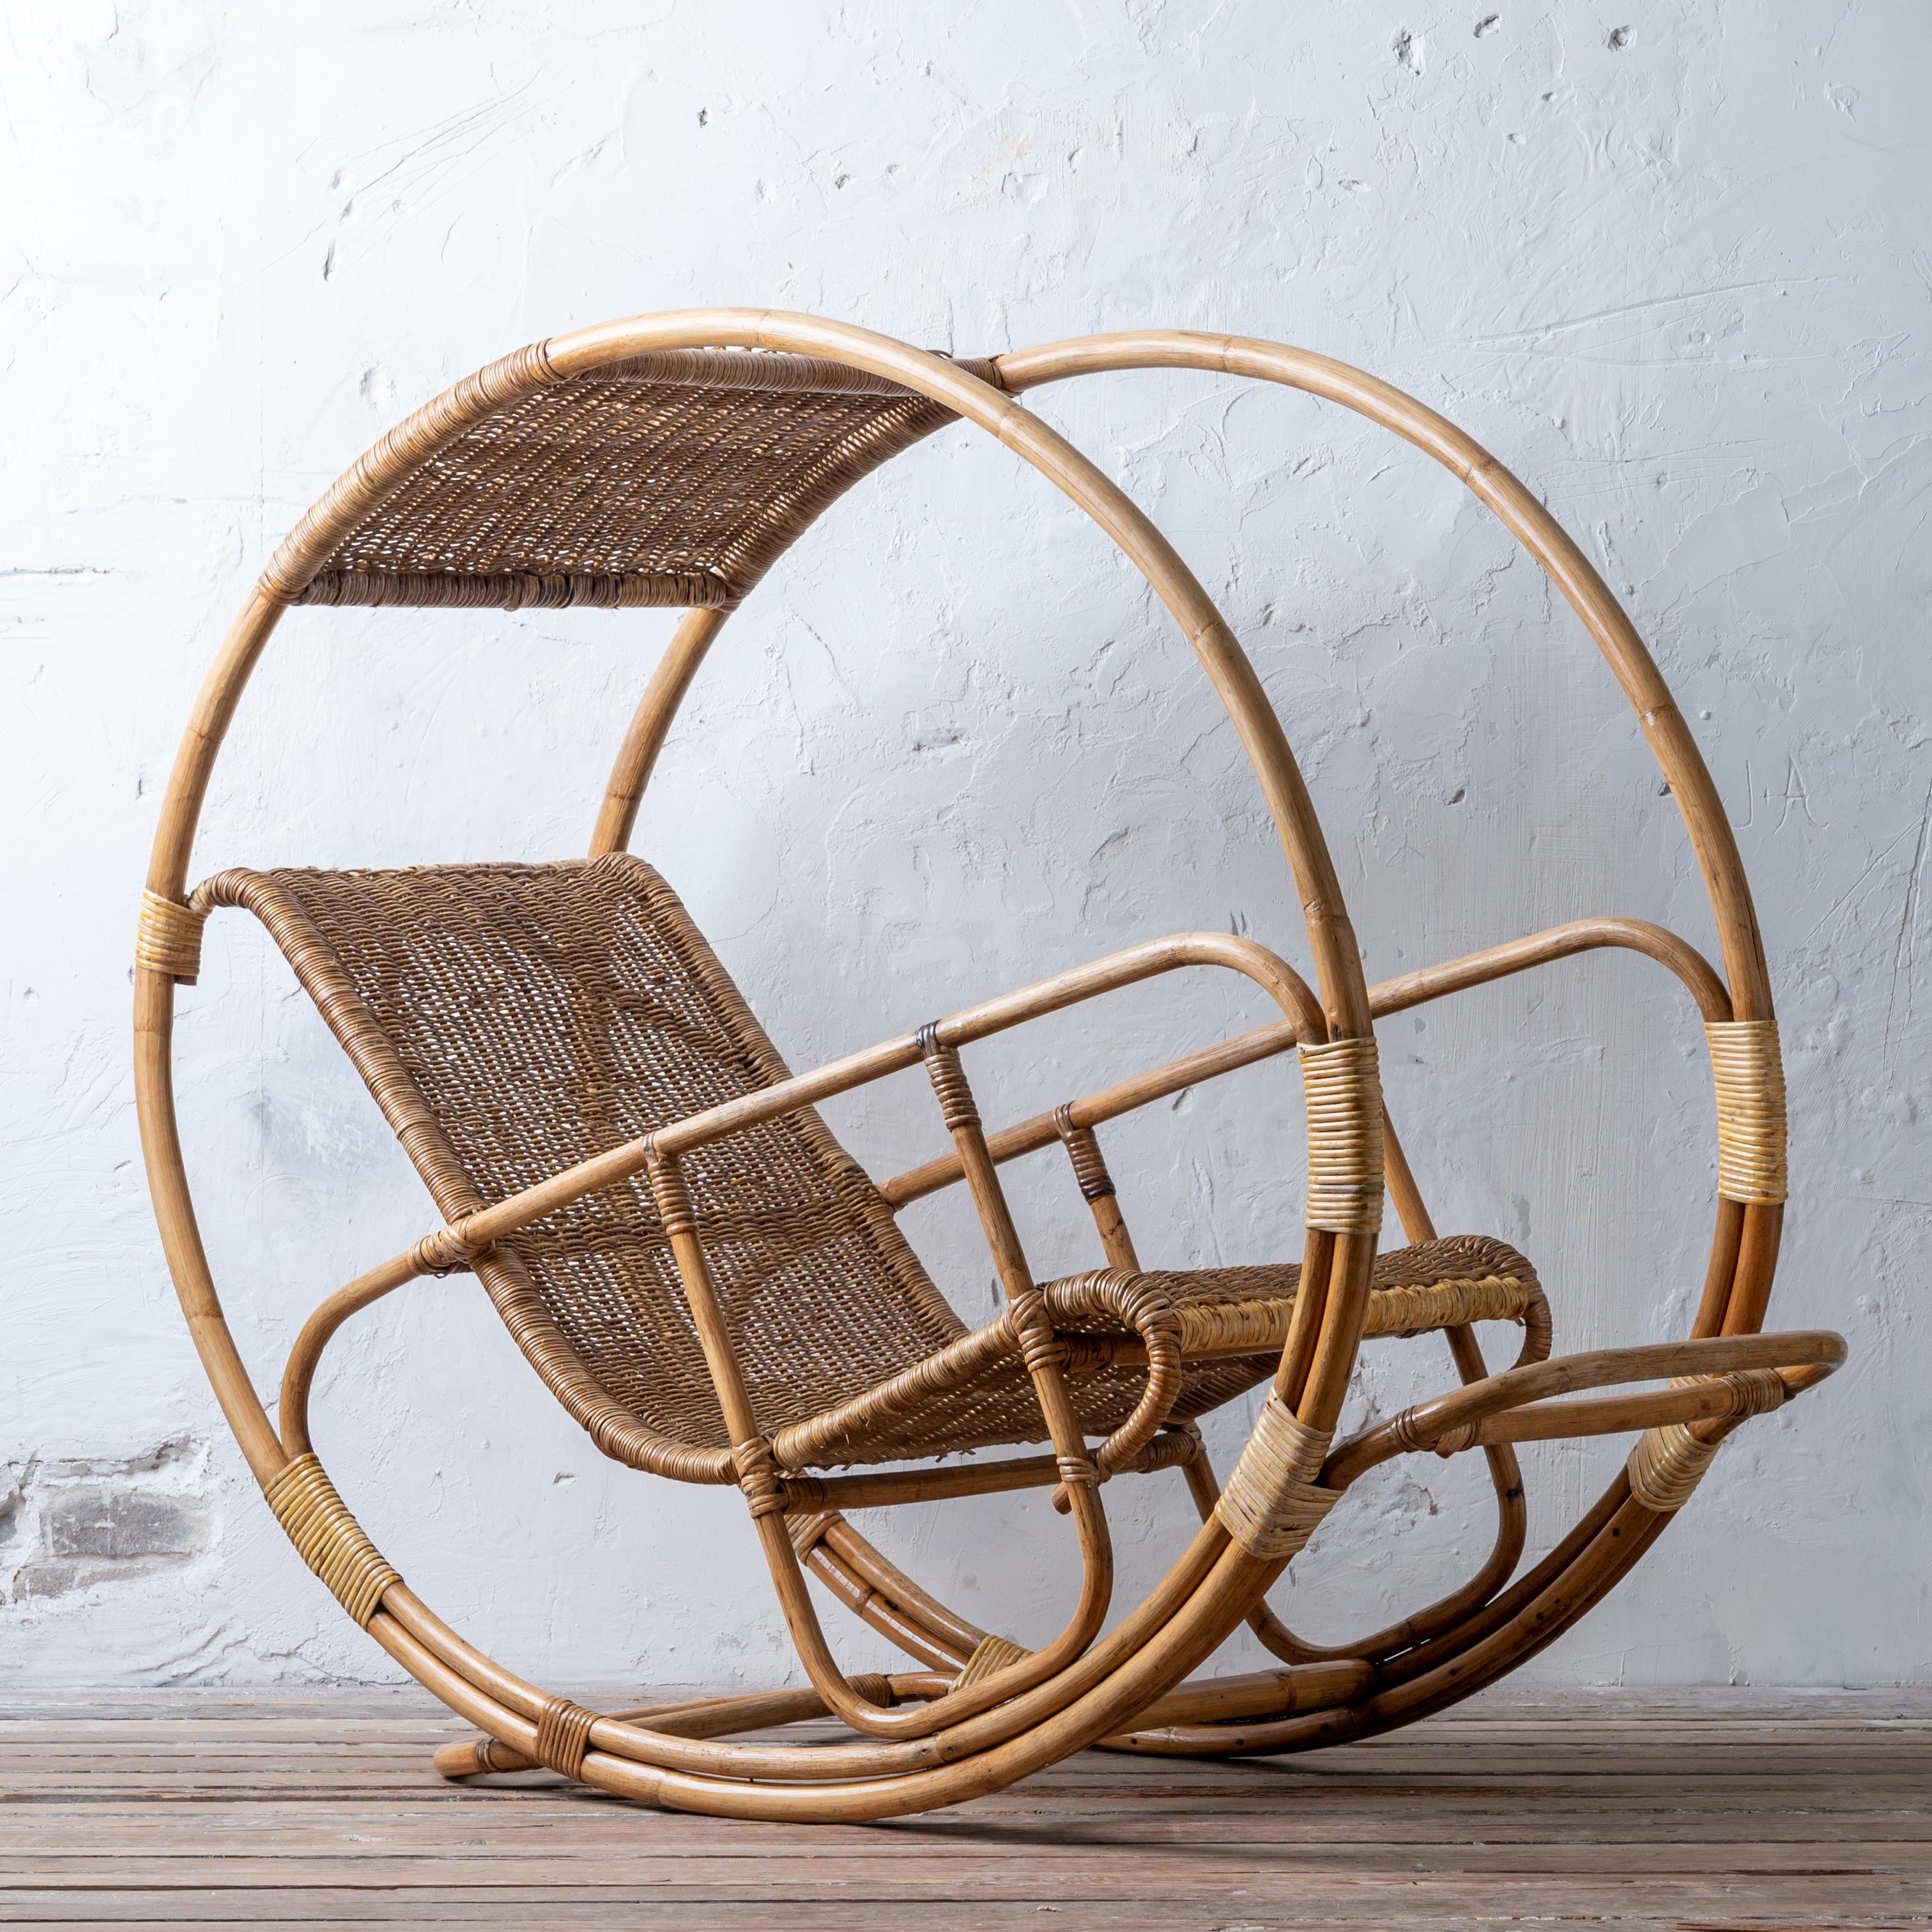 A Franco Bettonica “Dondolo” rocking lounge chair, Italy, 1964.  Rattan and Bamboo. Restored. 

24 inches wide by 57 inches deep by 48 inches tall